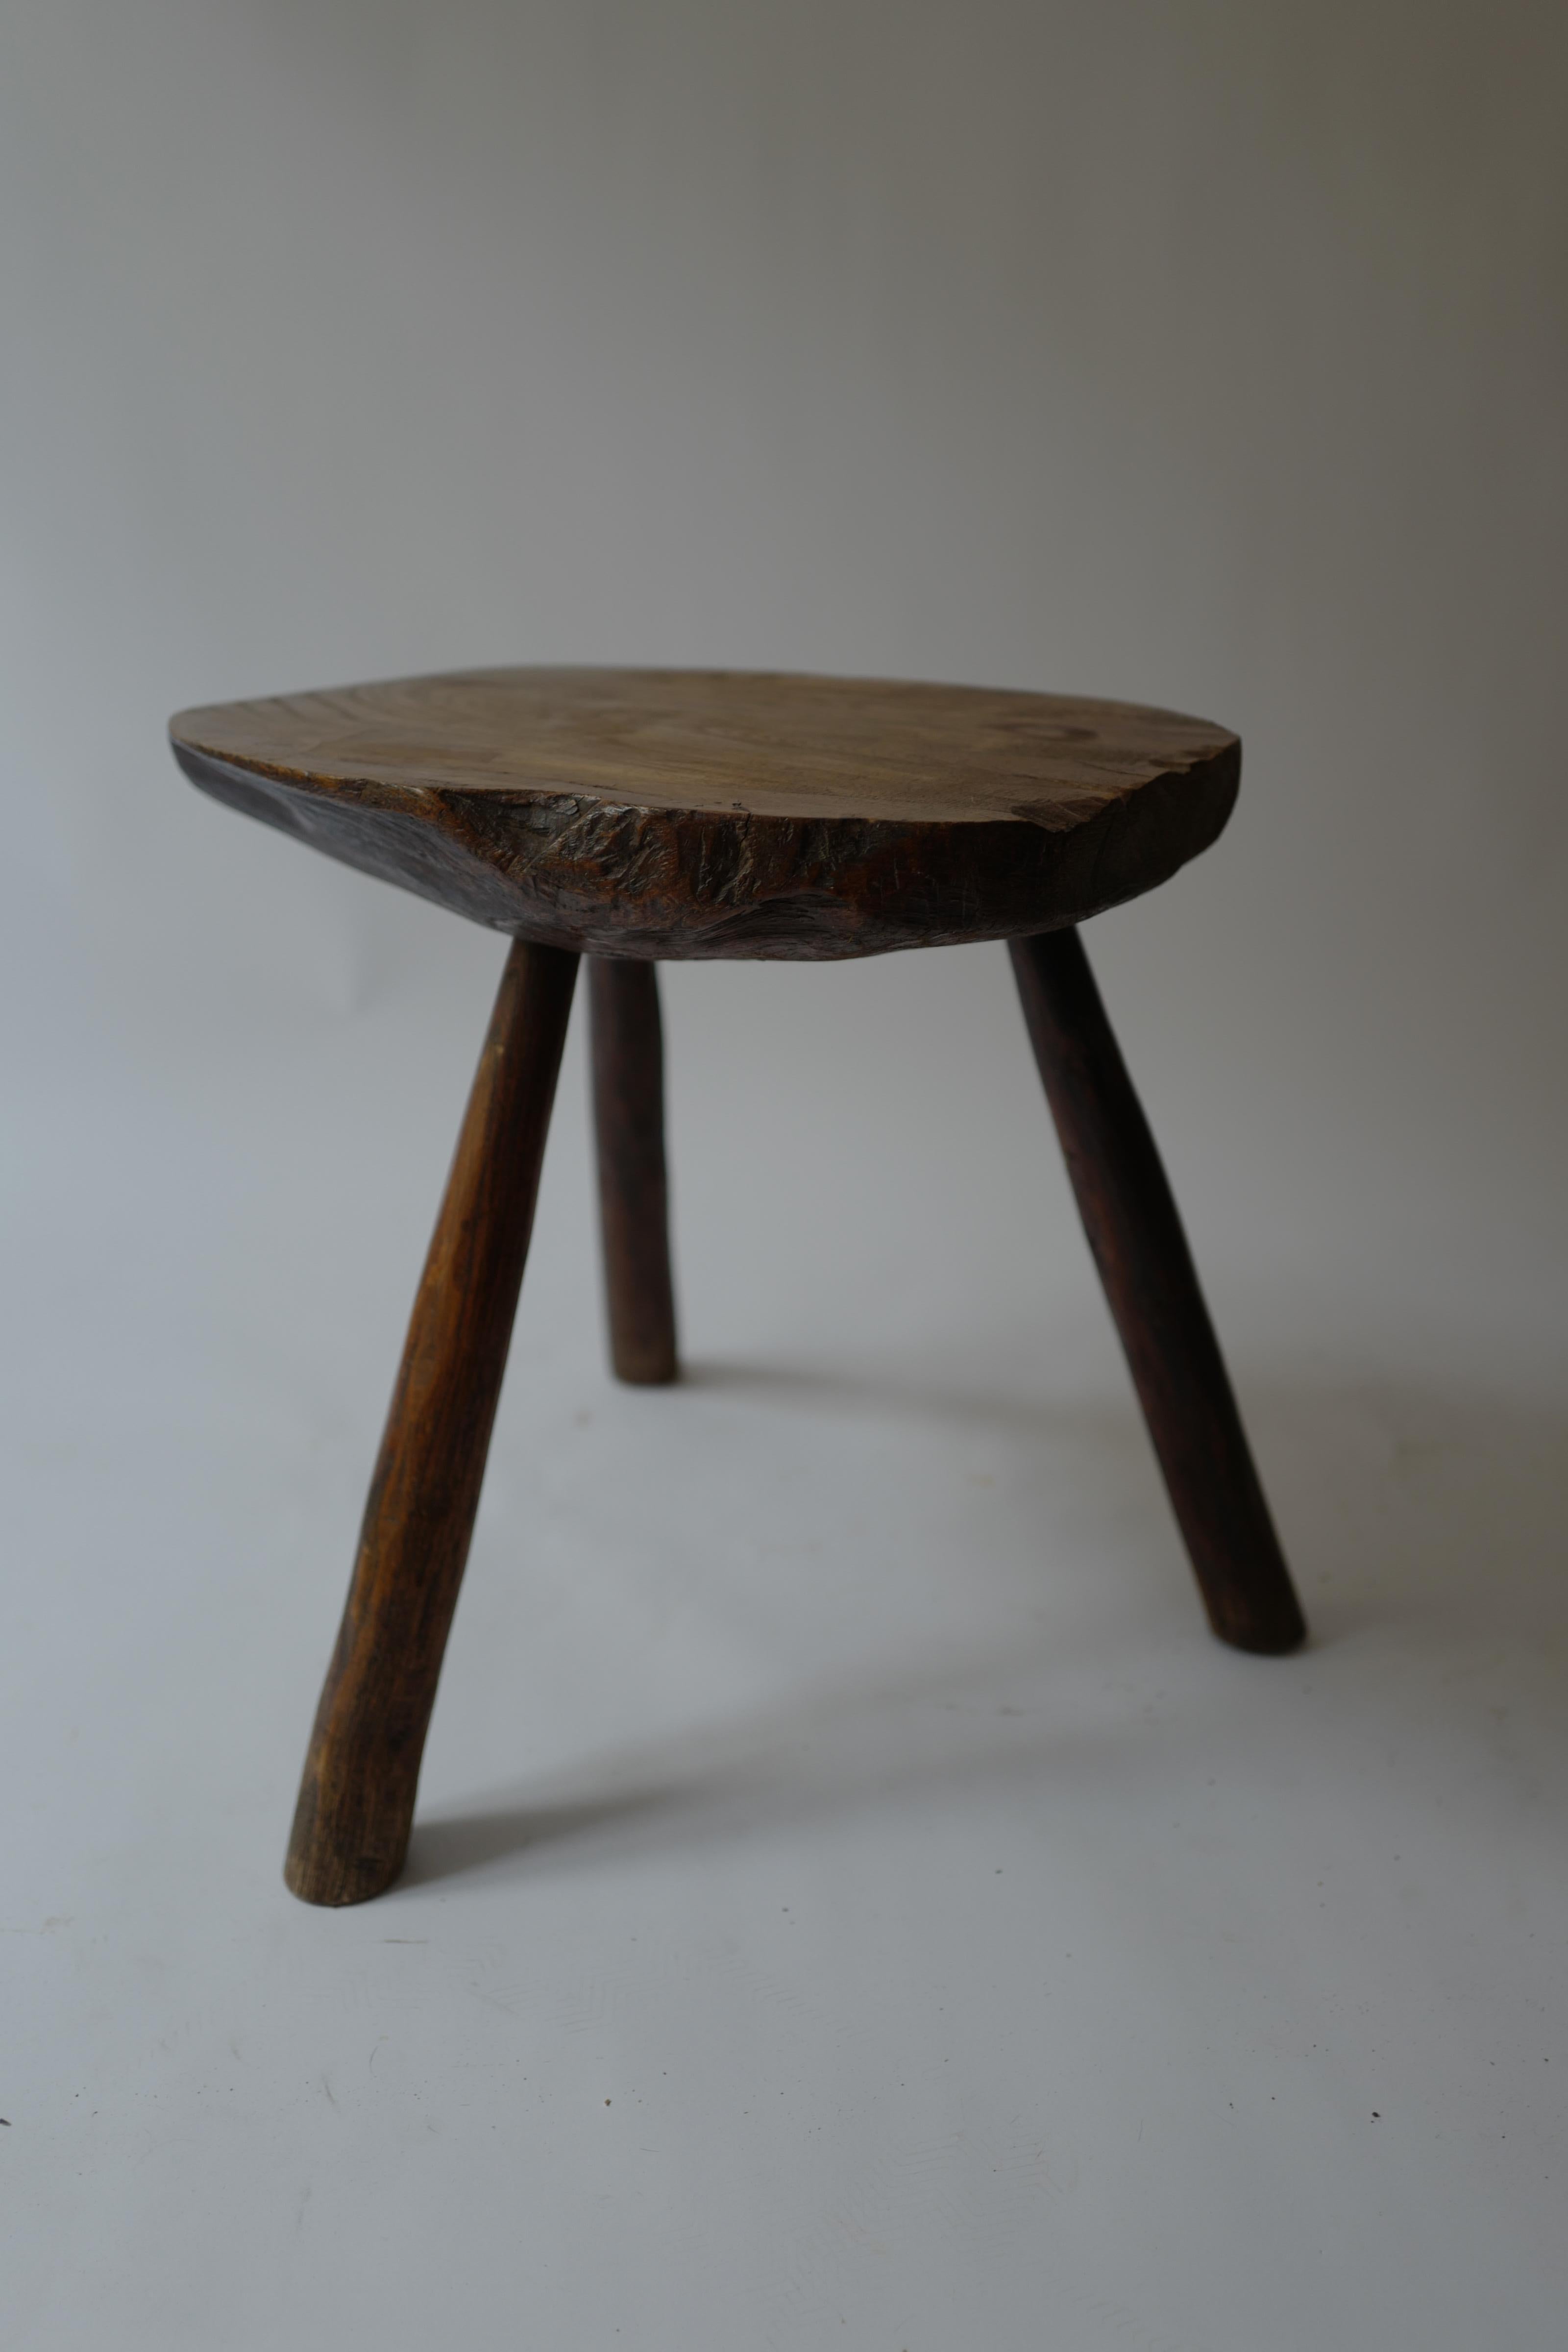 Primitive French side table circa 1900 from Provence.